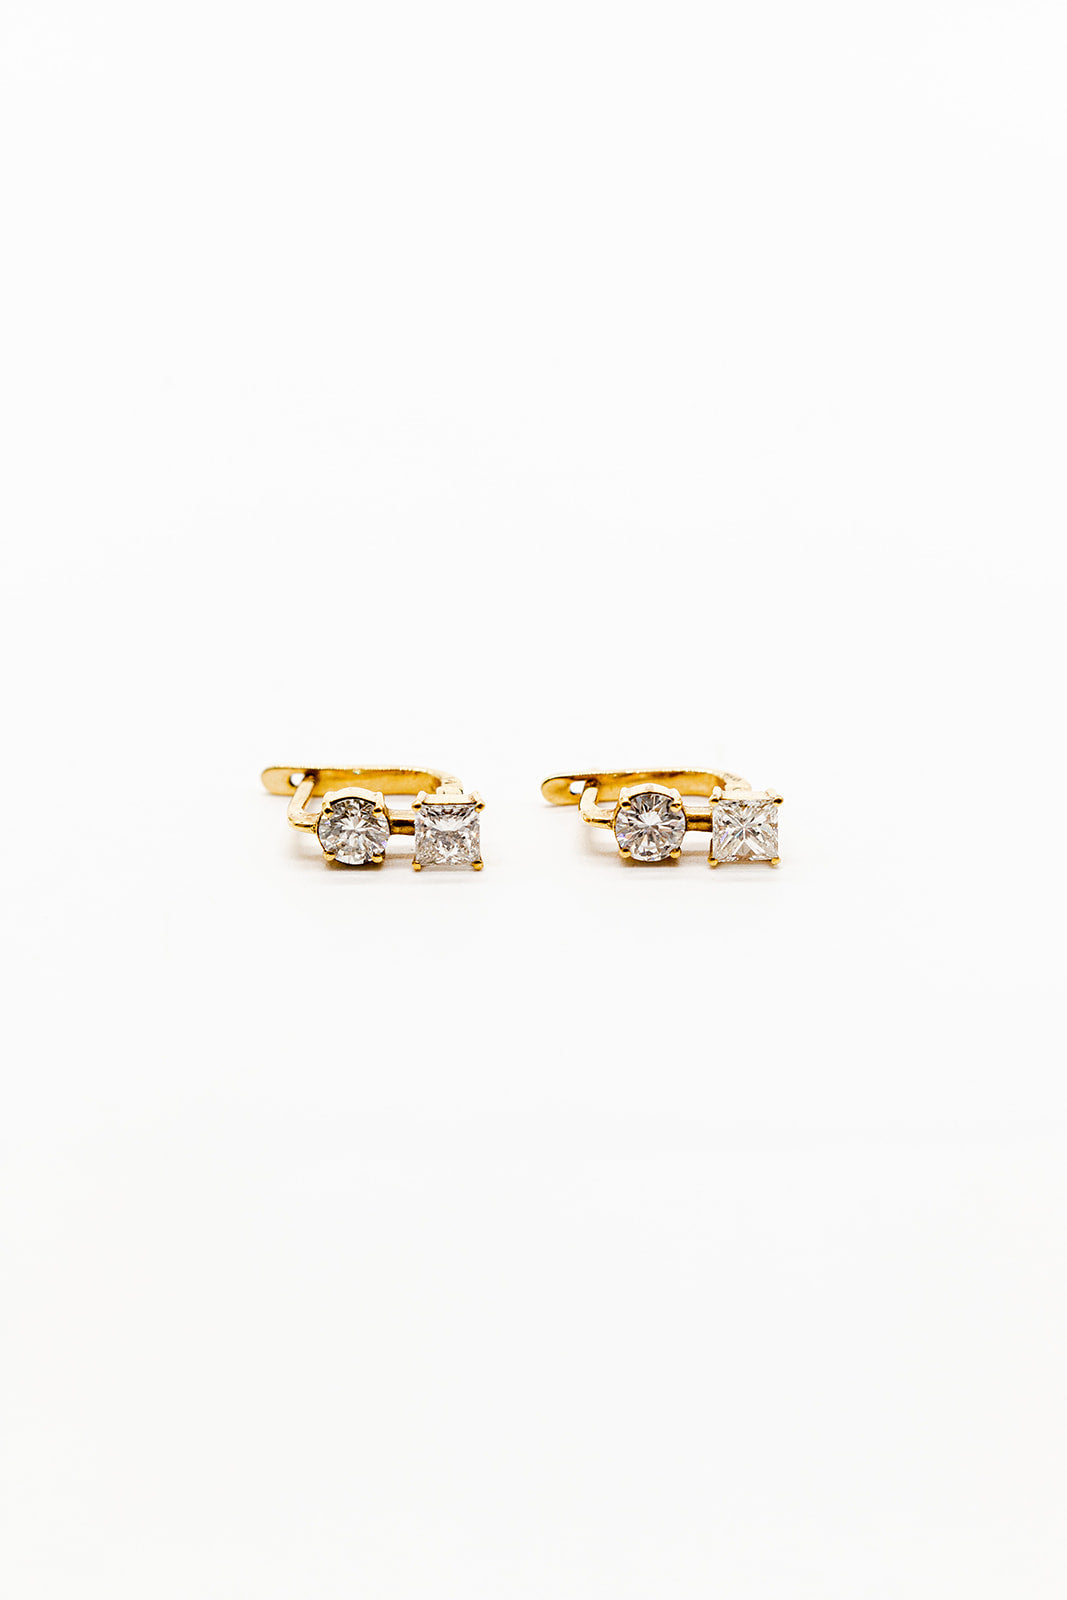 18K Yellow Gold Square and Round Diamond Clip Earrings